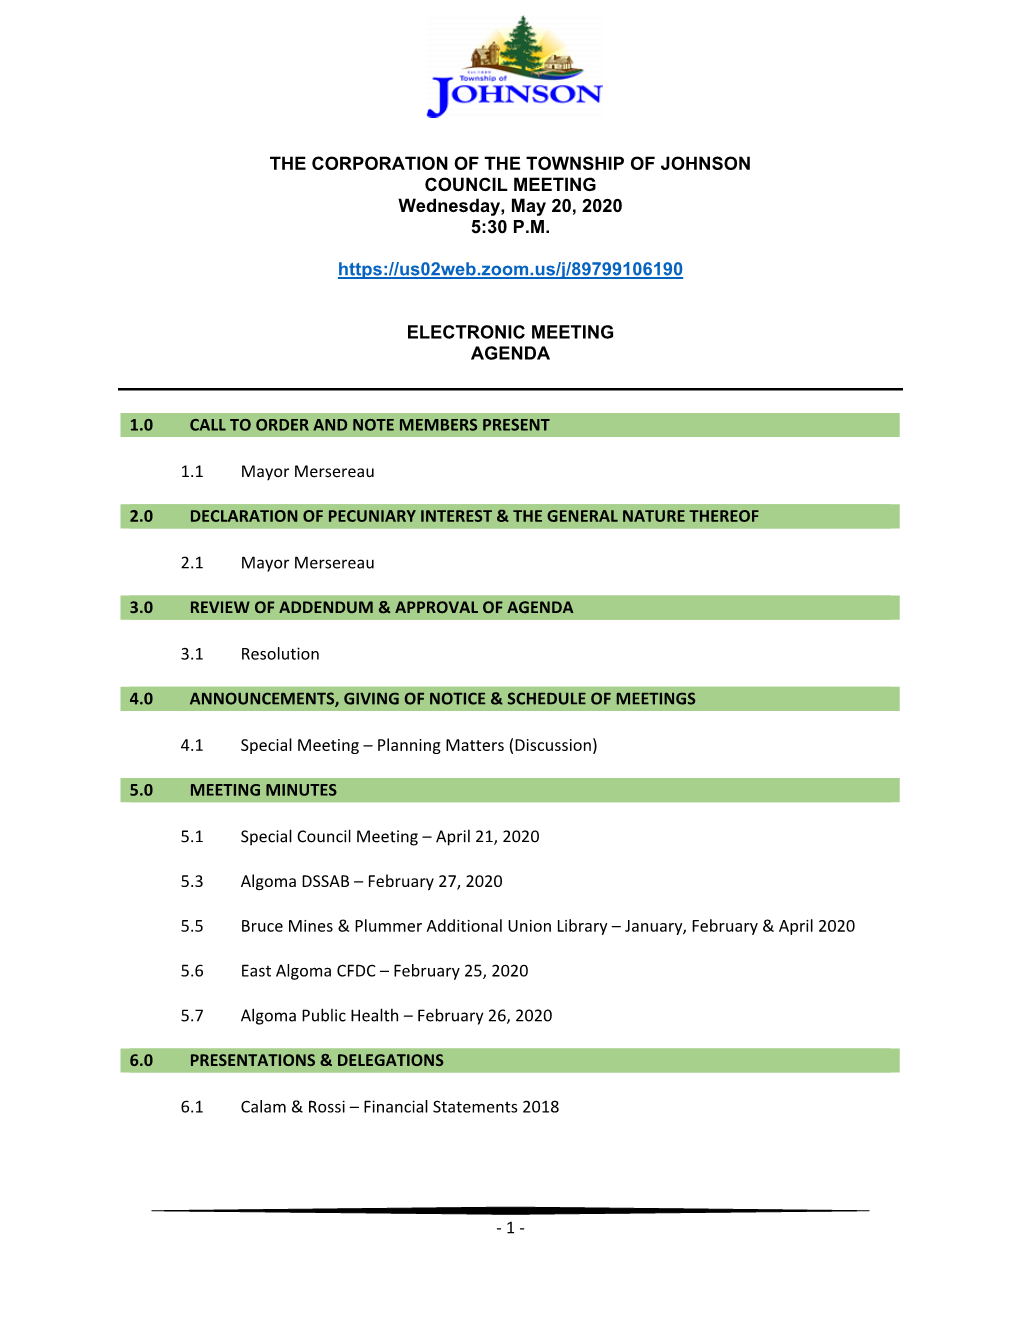 THE CORPORATION of the TOWNSHIP of JOHNSON COUNCIL MEETING Wednesday, May 20, 2020 5:30 P.M